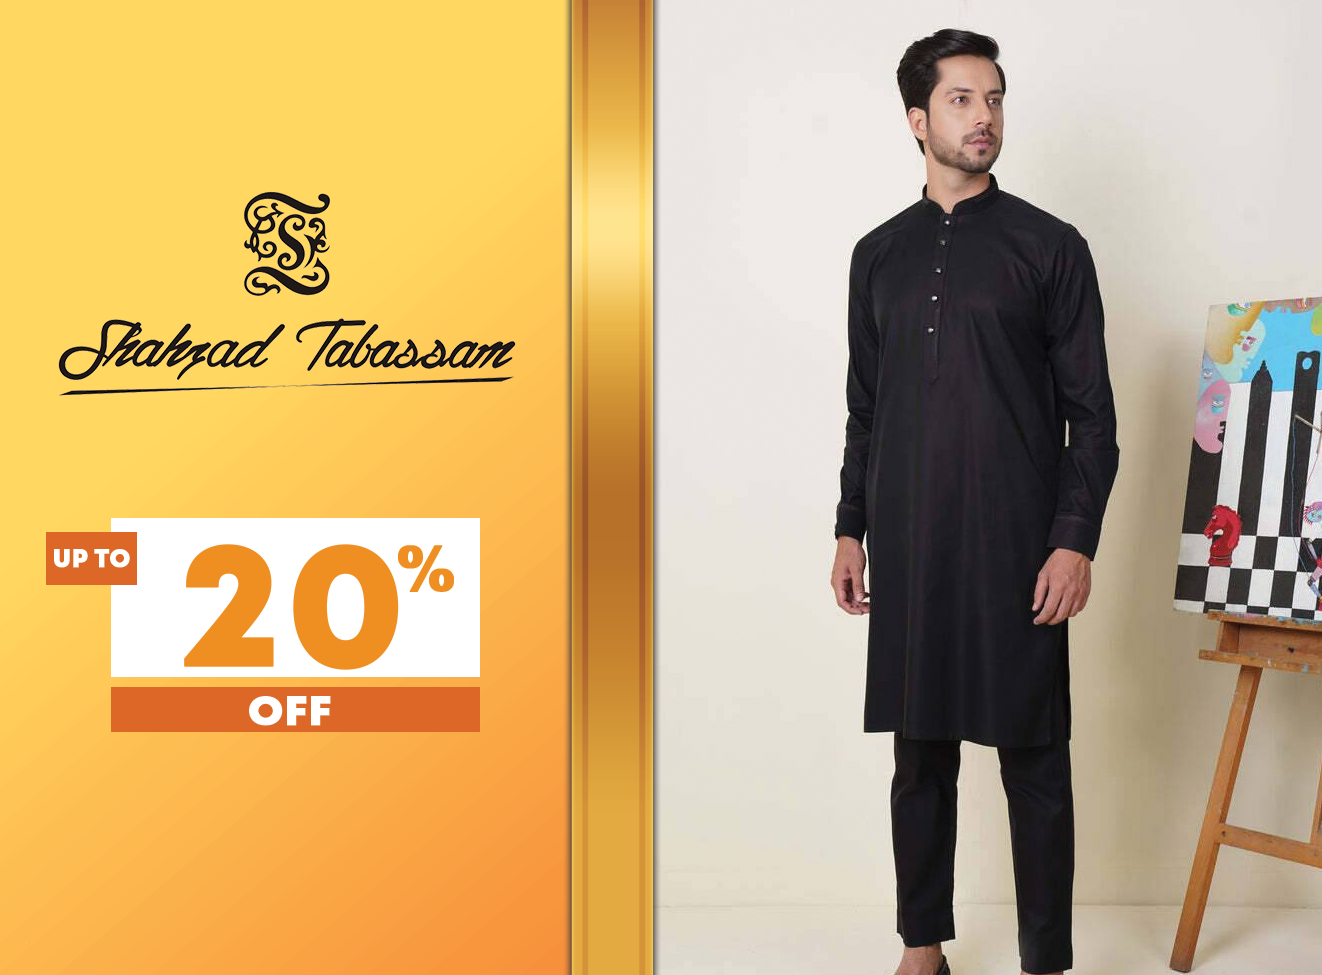 Leyjao.pk is Bringing Hot Deals this Eid - Avail up to 83% Off!